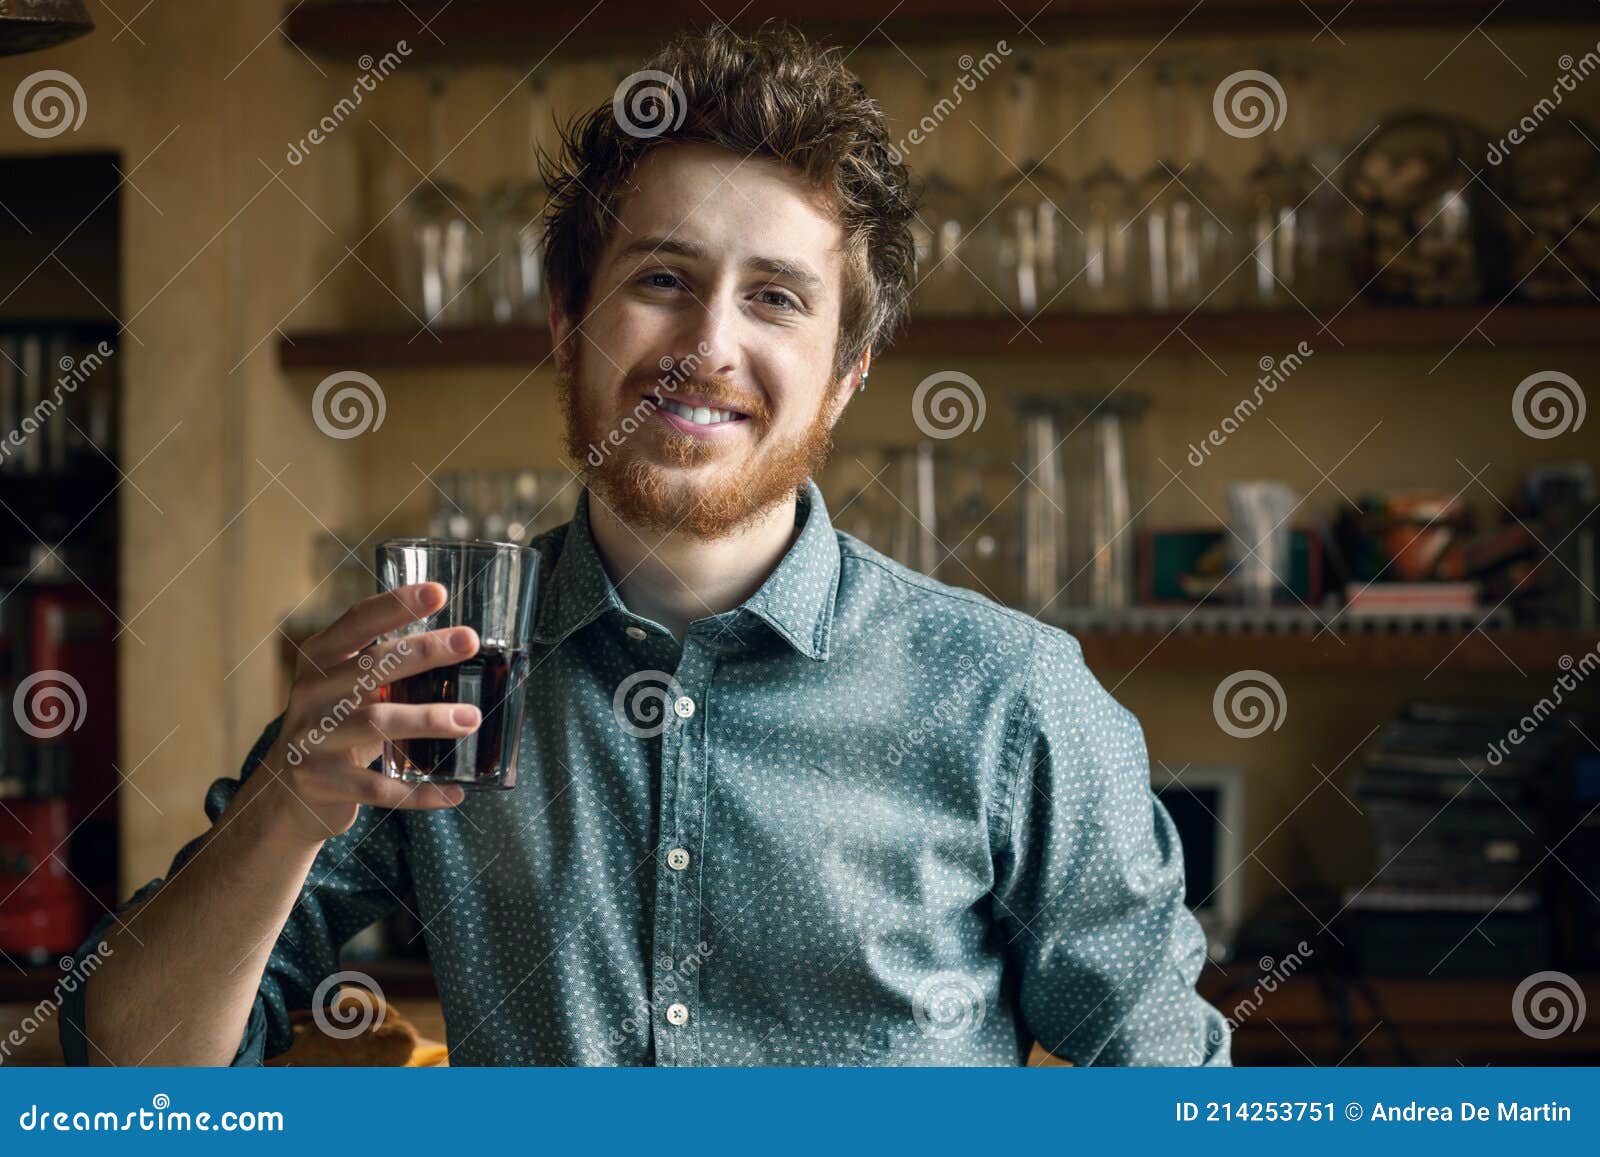 Hipster Man Drinking a Glass of Coke Stock Image - Image of friendly ...